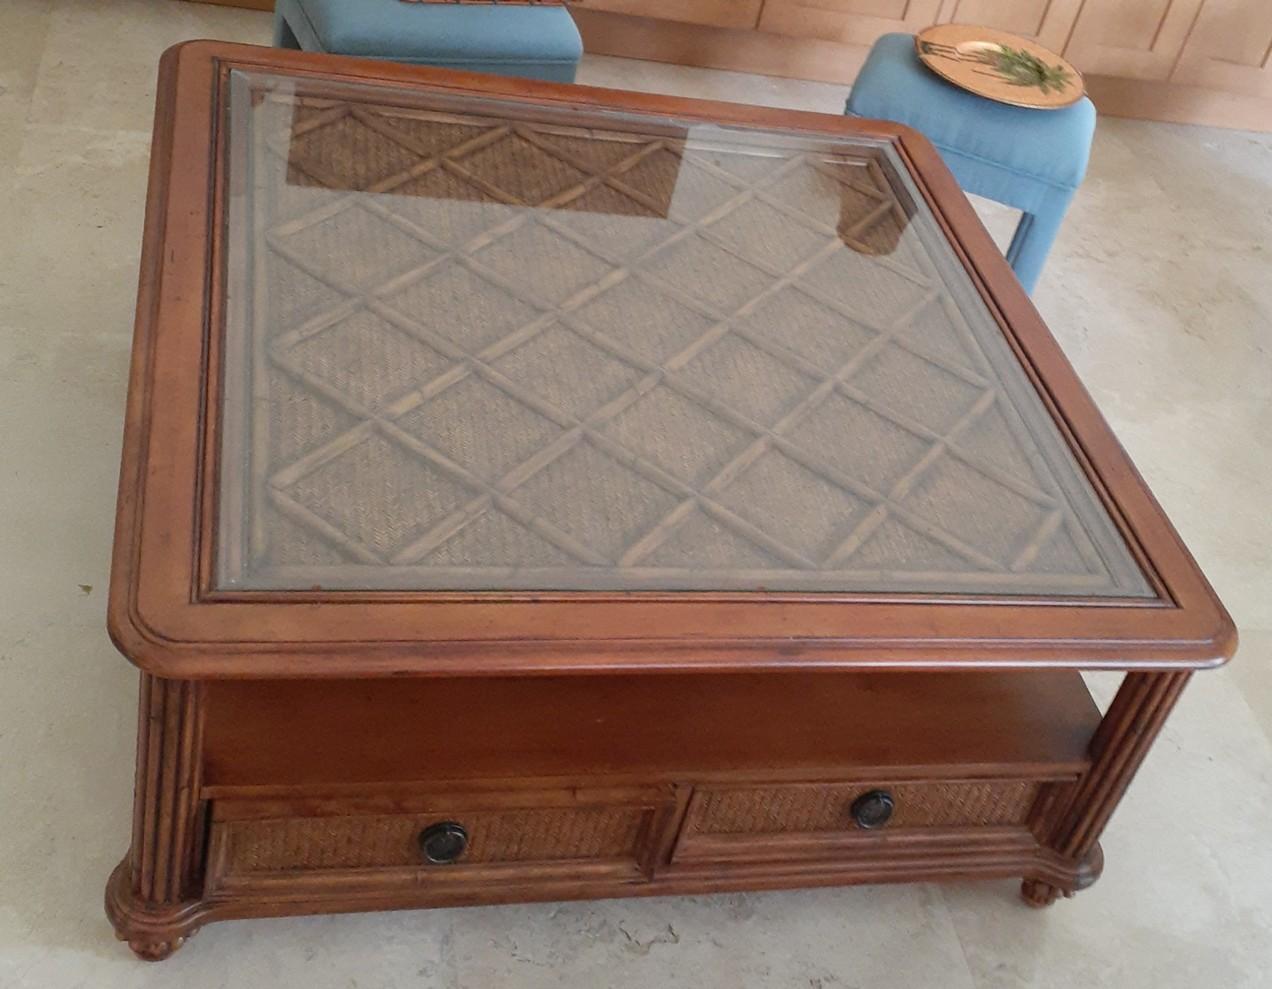 Brown Wicker Coffee Table with glasstop by Newport Beach - 46 x 46 inches